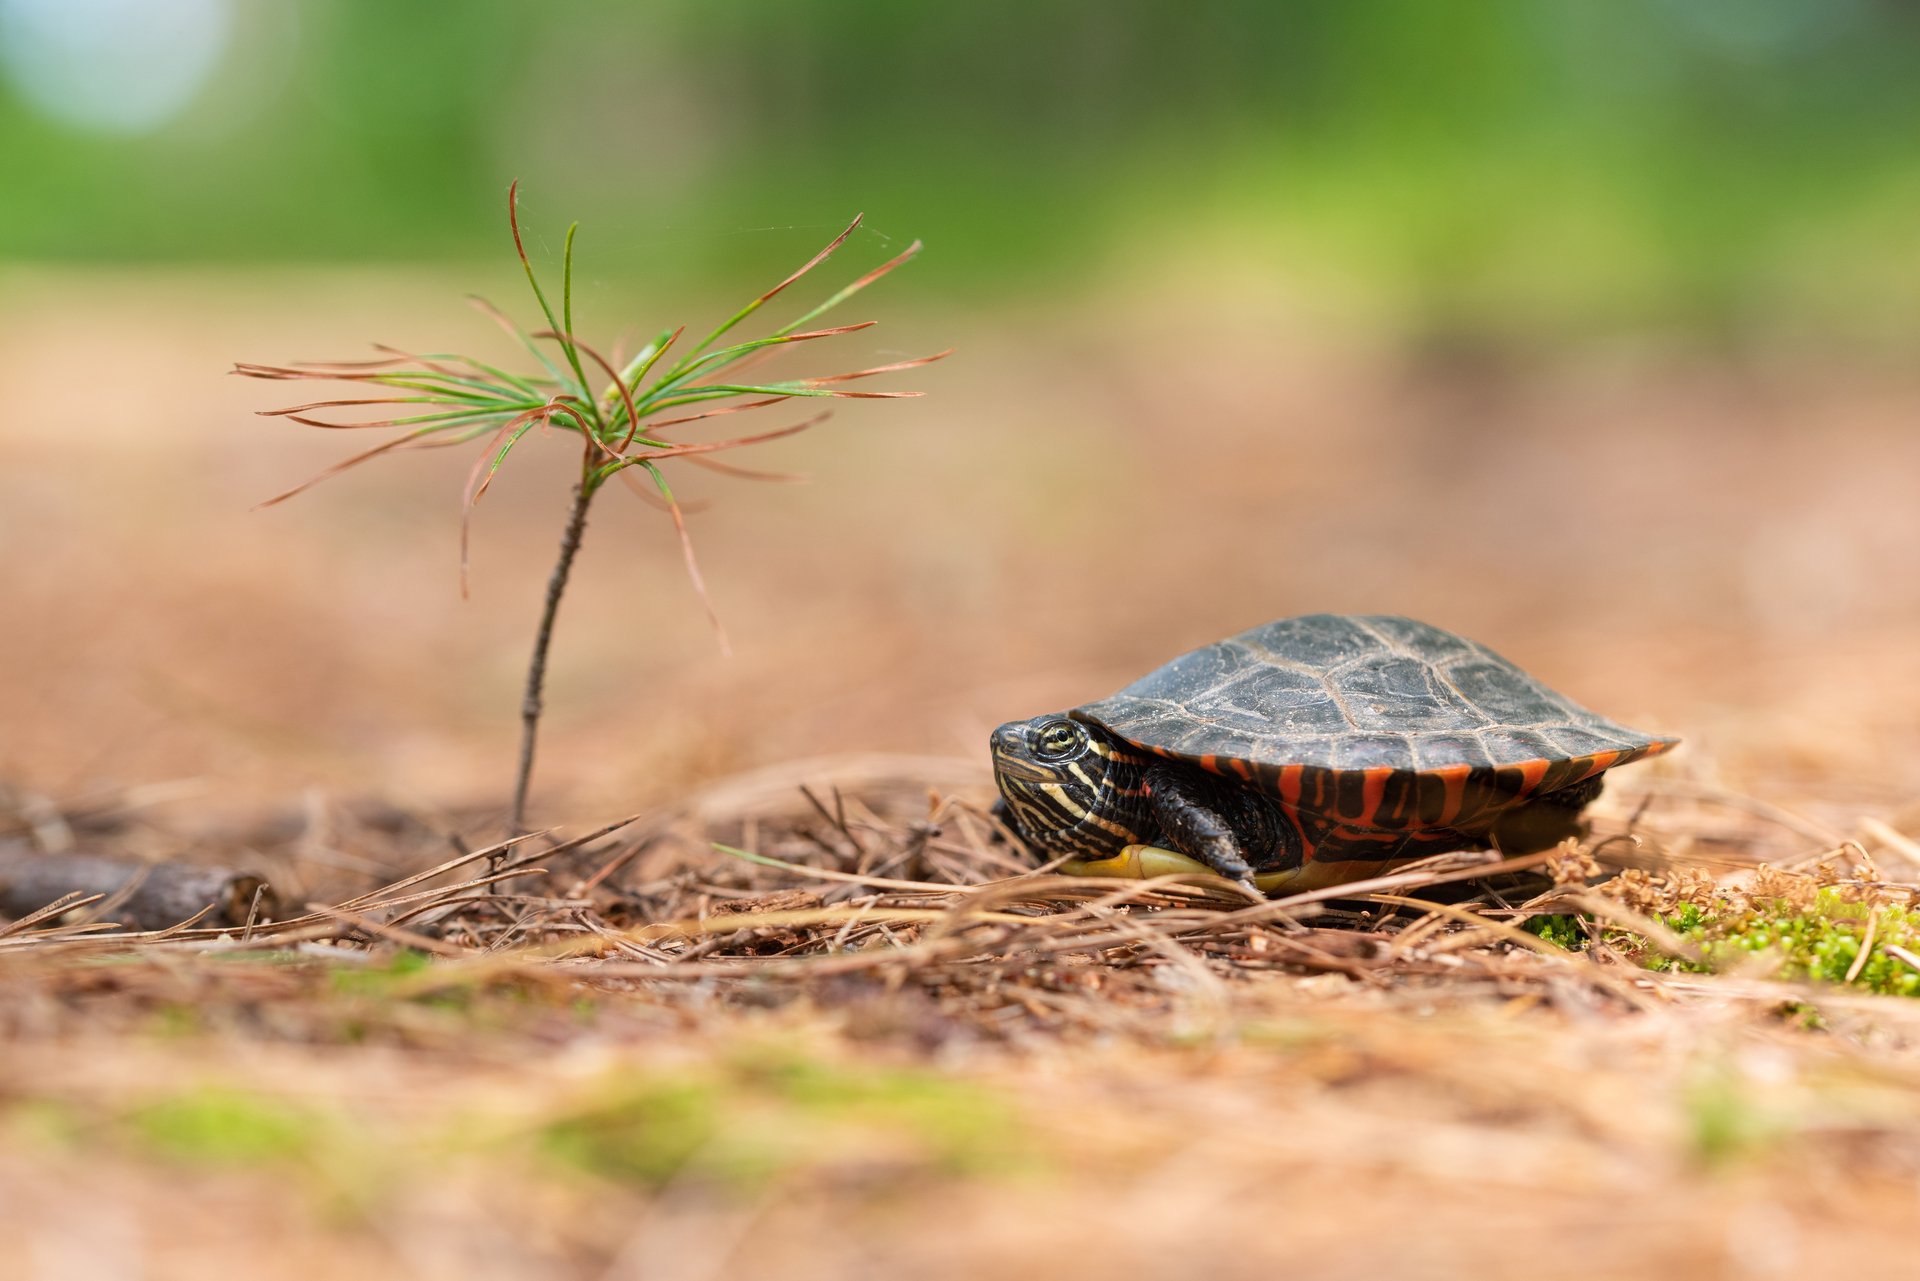 small turtle on the ground next to a twig